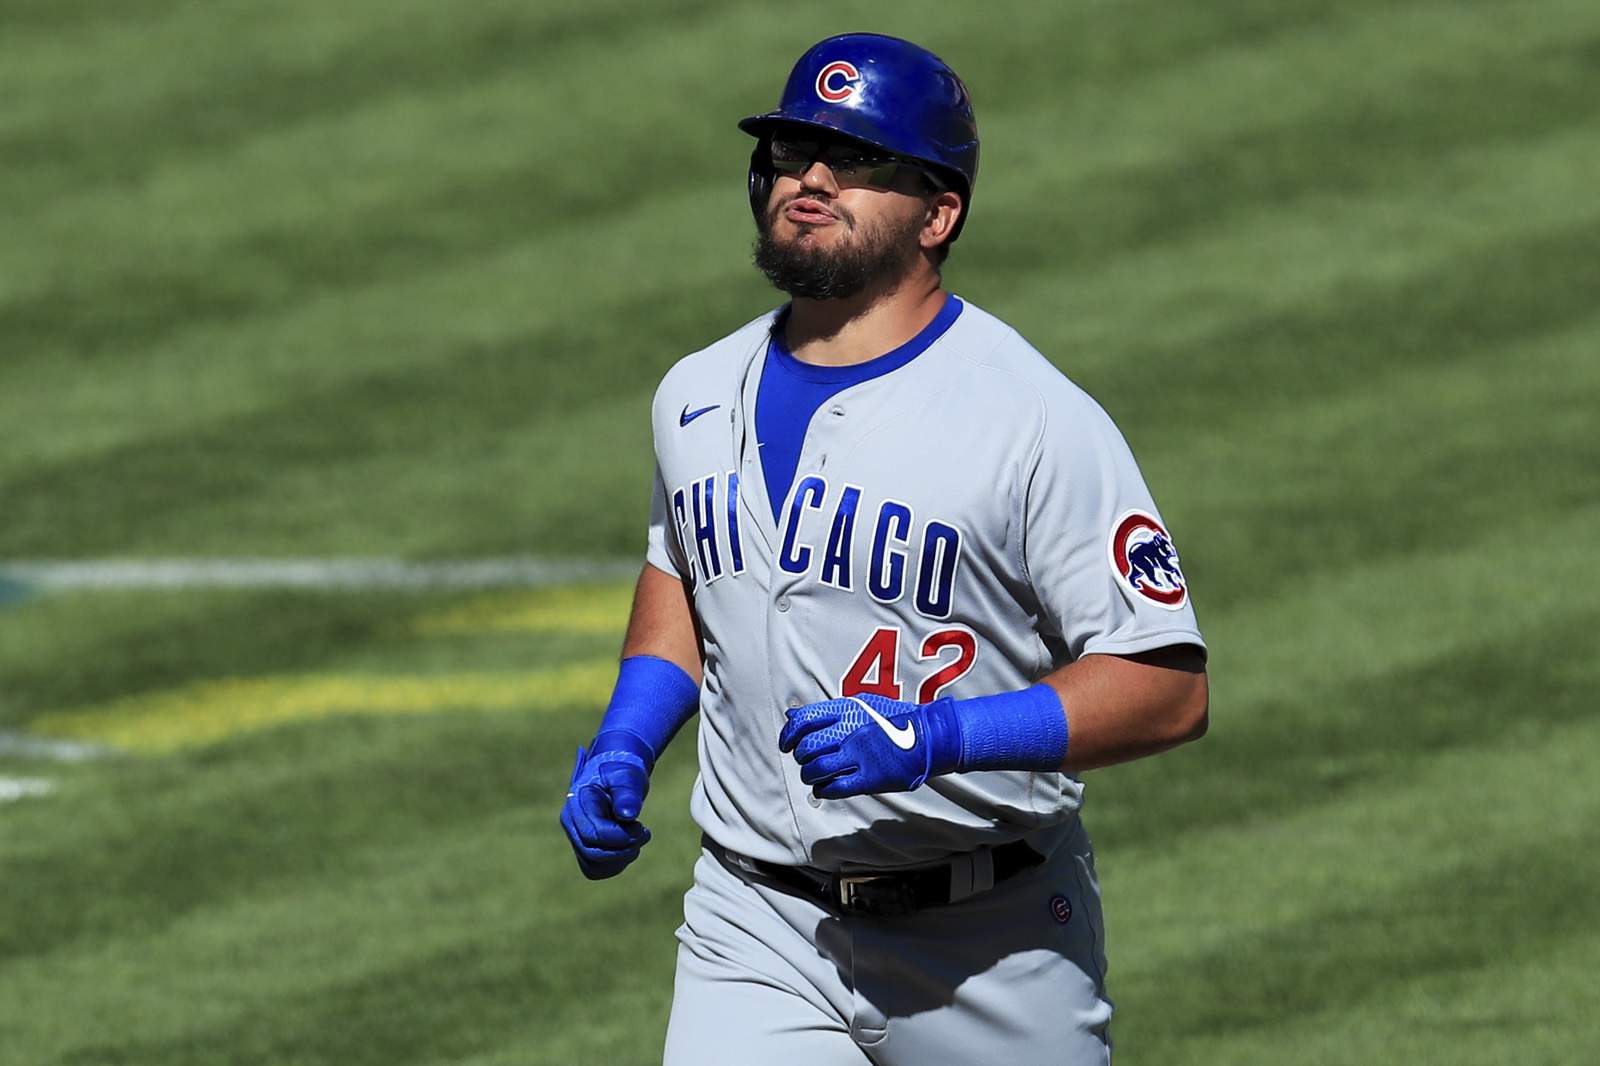 Schwarber homers twice as Cubs pound Reds 10-1